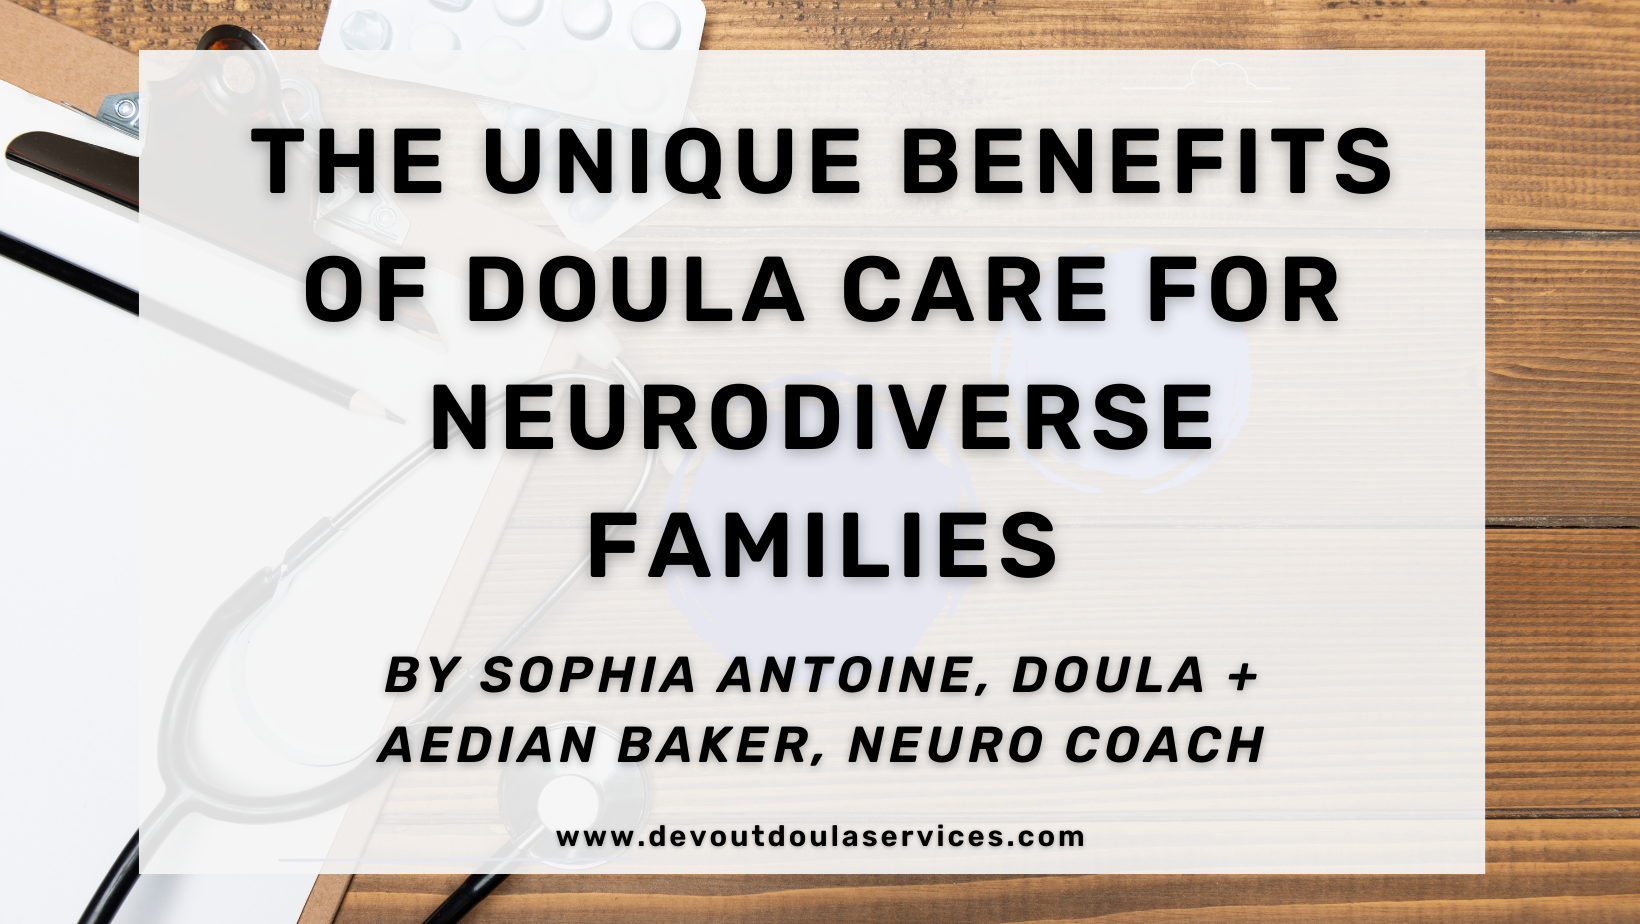 A promotional image highlighting an informational article on the benefits of doula care for childbirth and neurodiverse families, authored by Sophia Antoine and Aedian Baker.